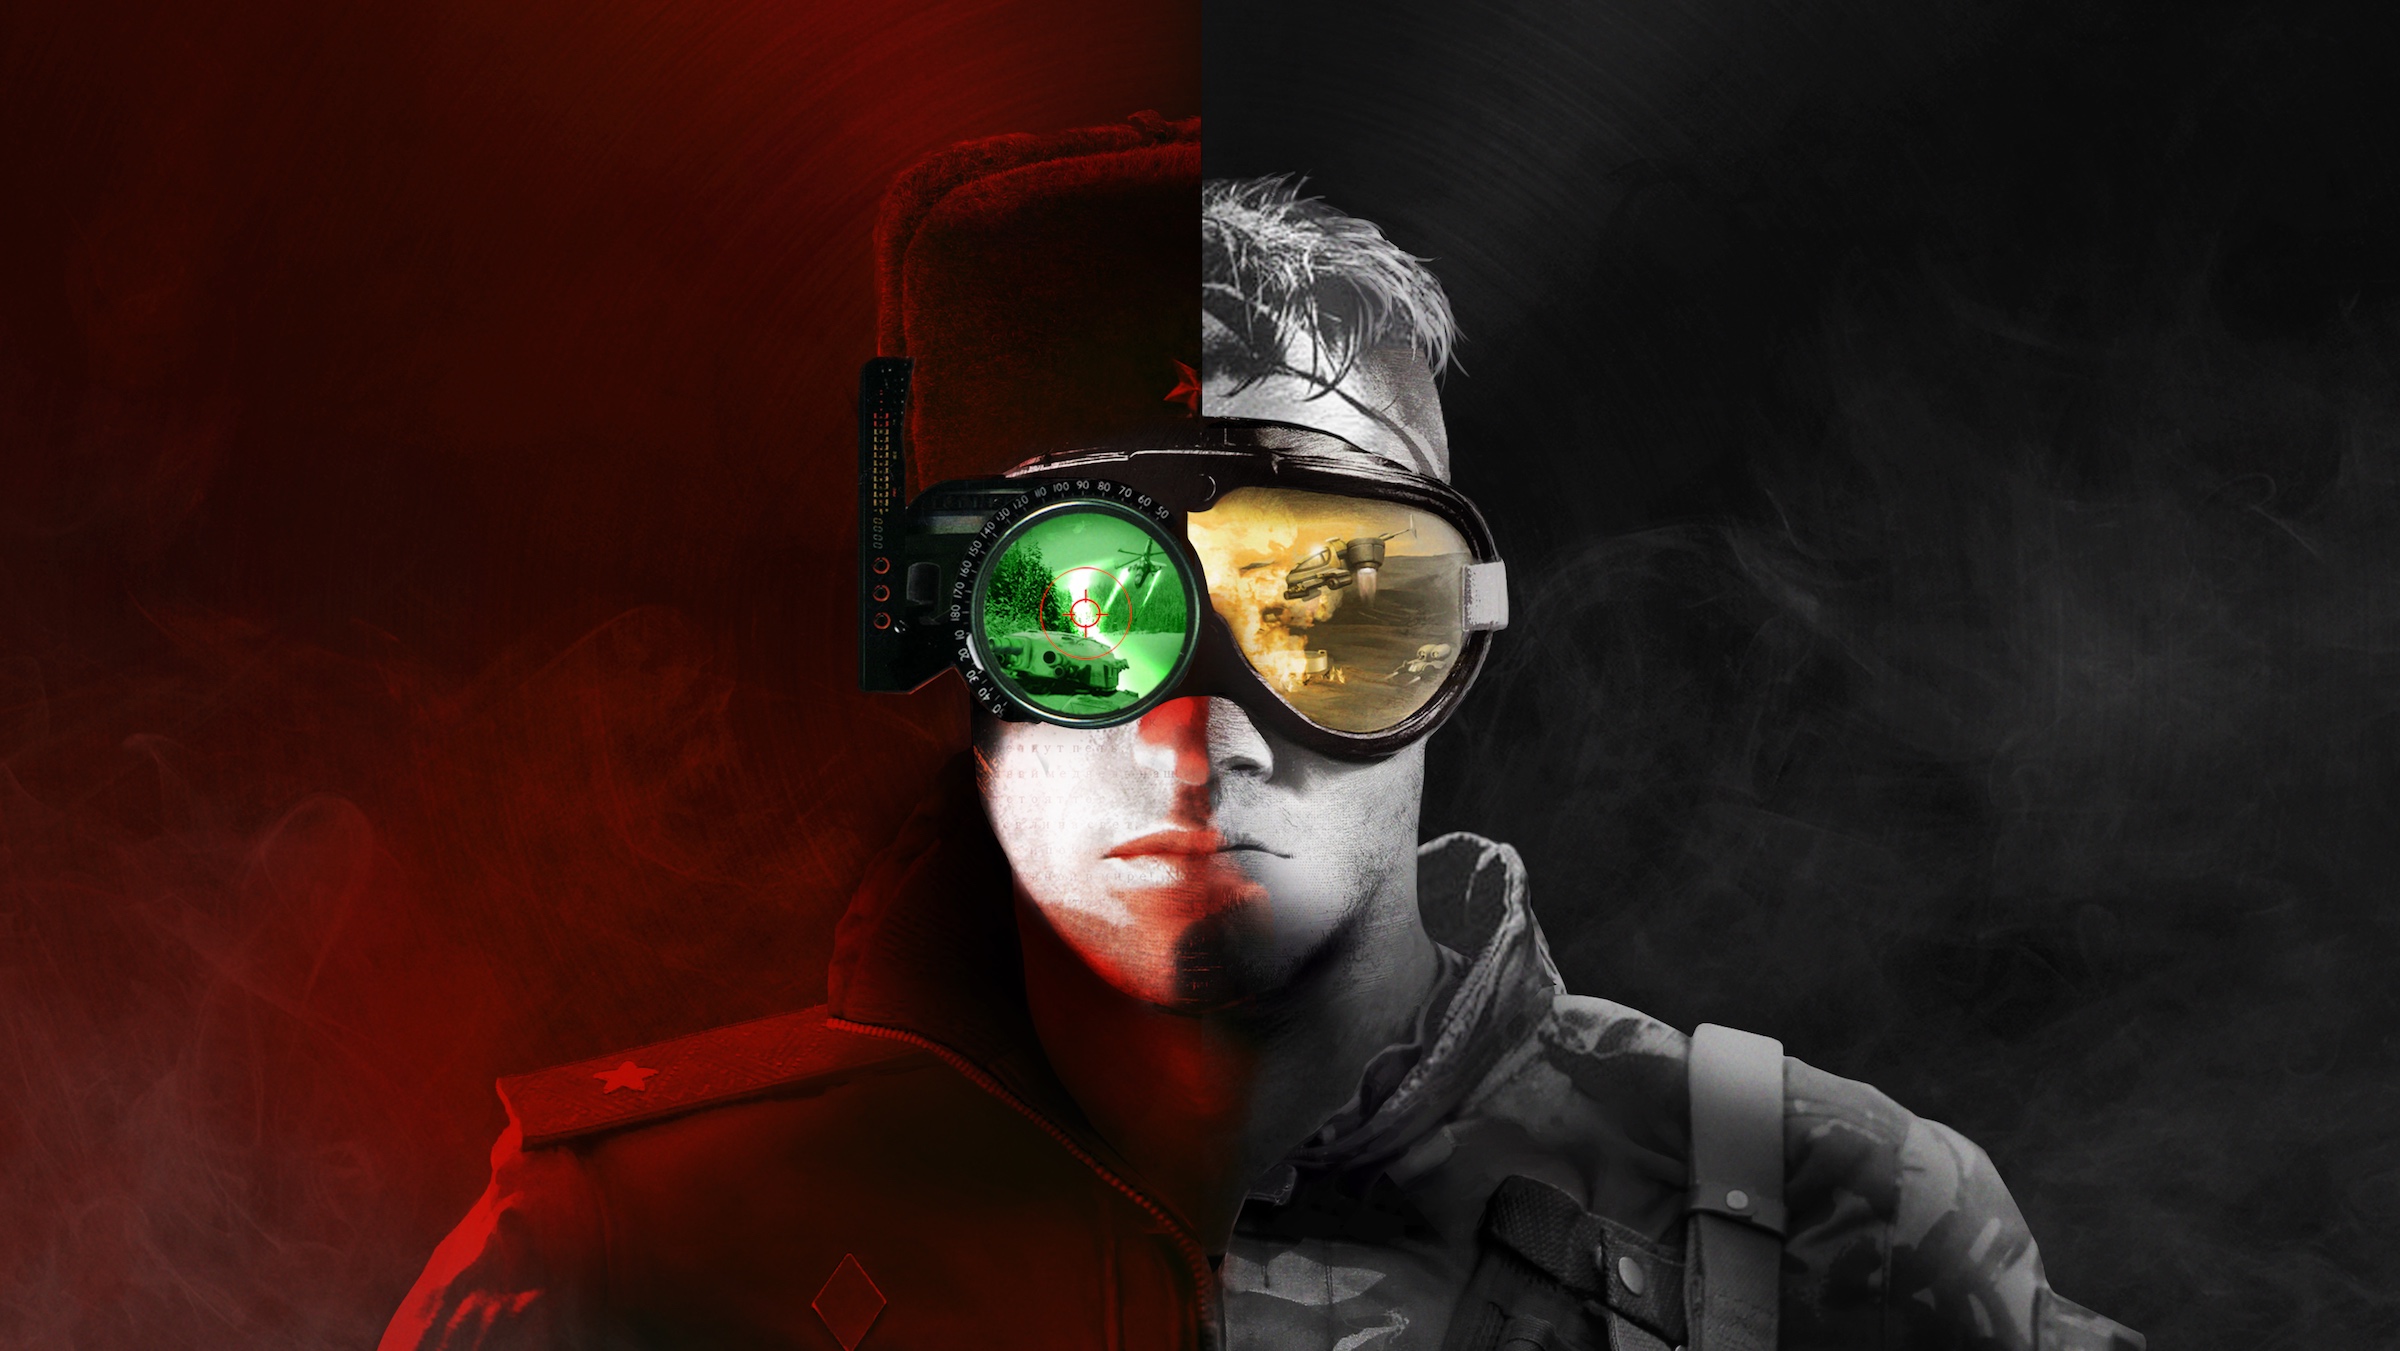 Wallpaper, Command Conquer, face, Video Game Art, artwork, night vision goggles, smoke, video games, portrait, strategy games, uniform, red, camouflage 2400x1351